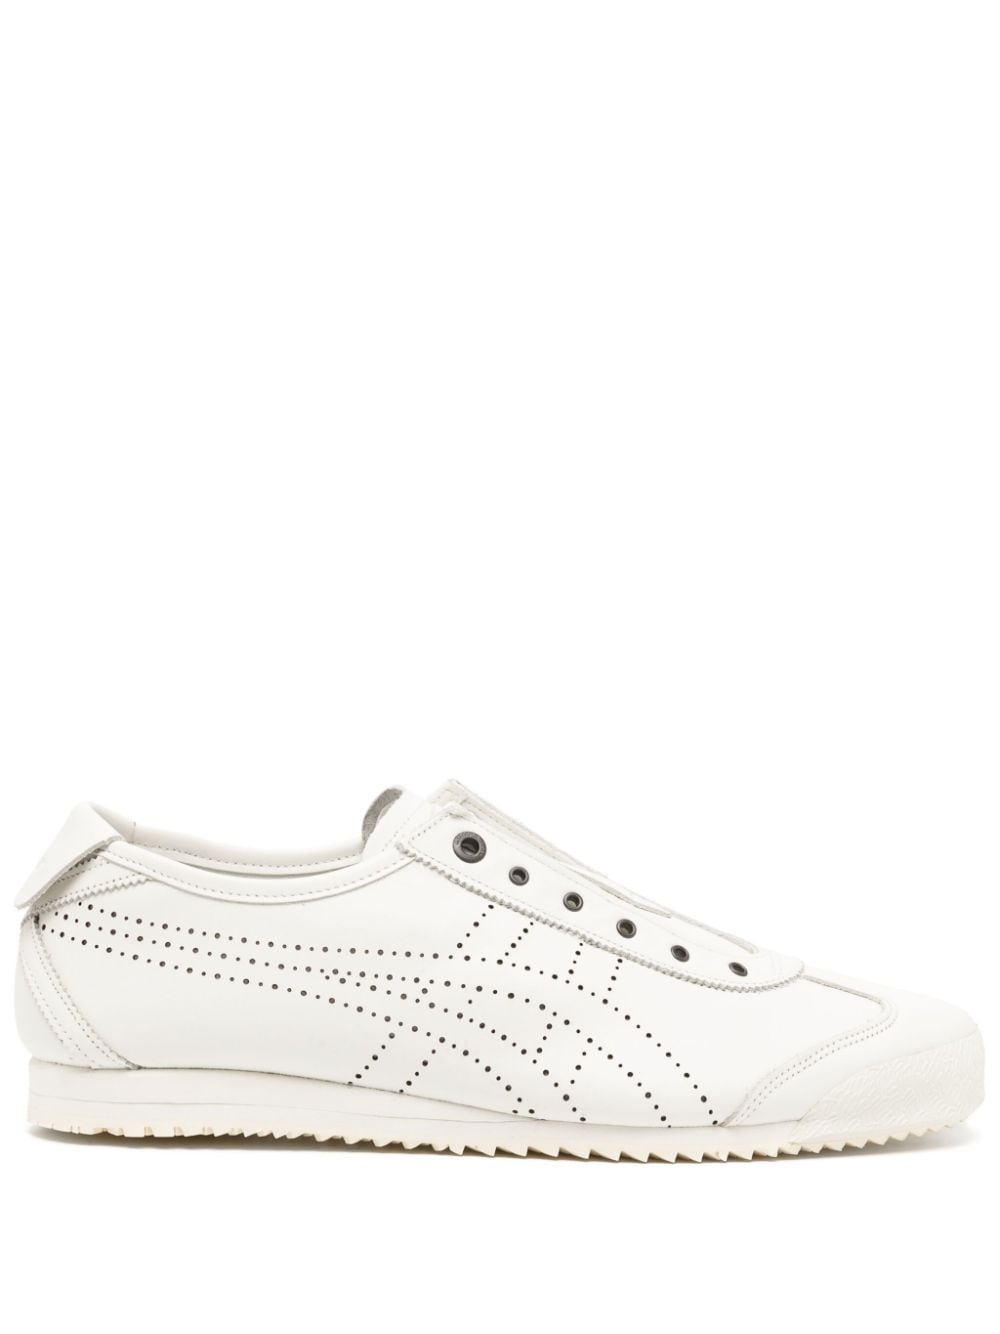 Onitsuka Tiger Mexico 66 Slip-on Sneakers In White